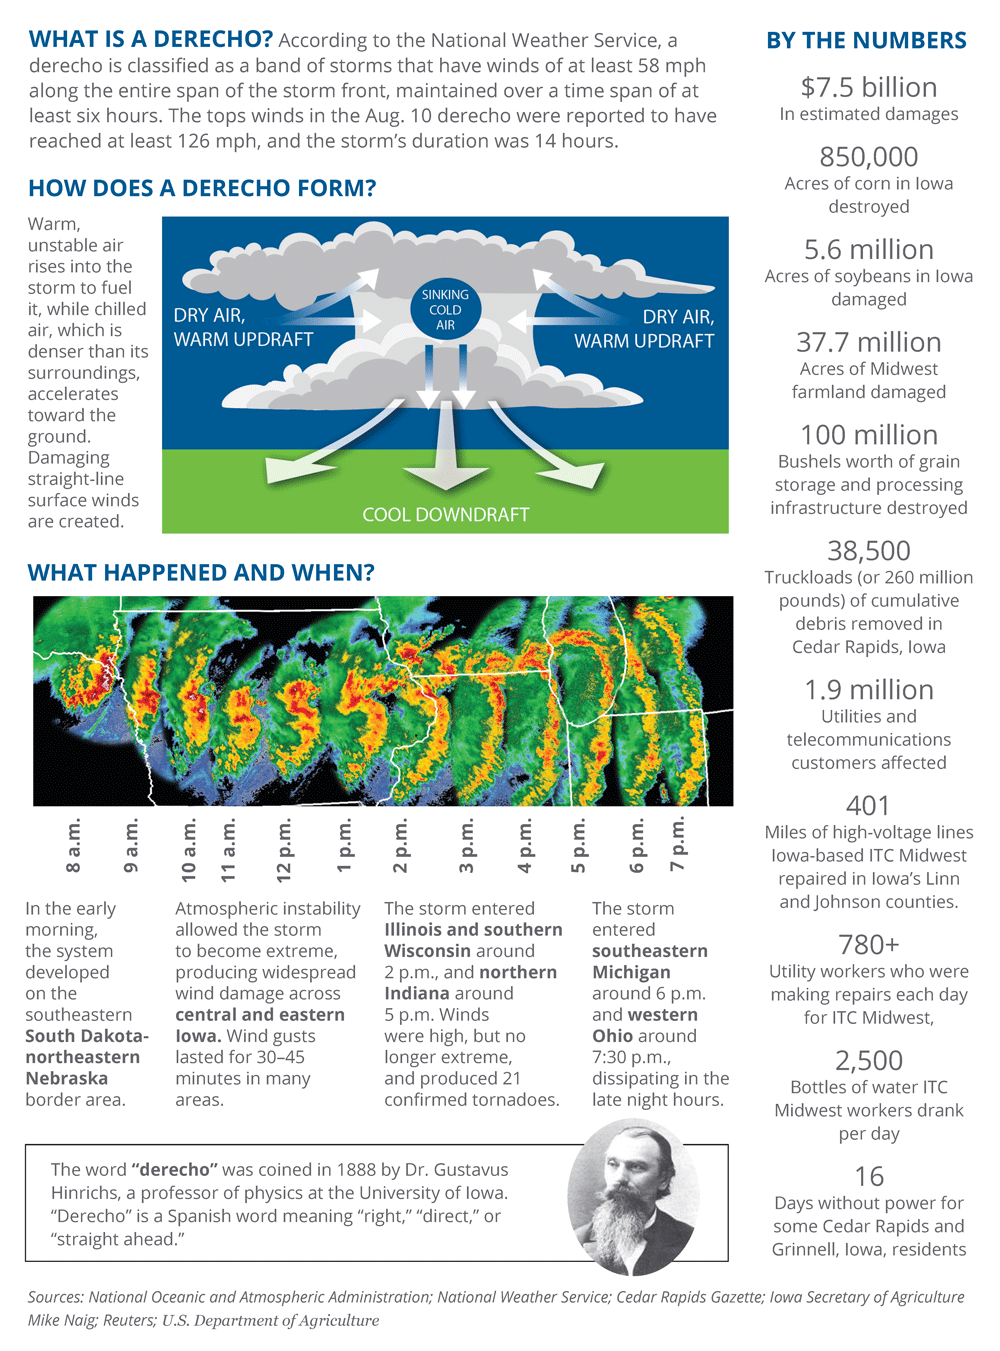 Infographic about the Aug. 10, 2020 derecho.